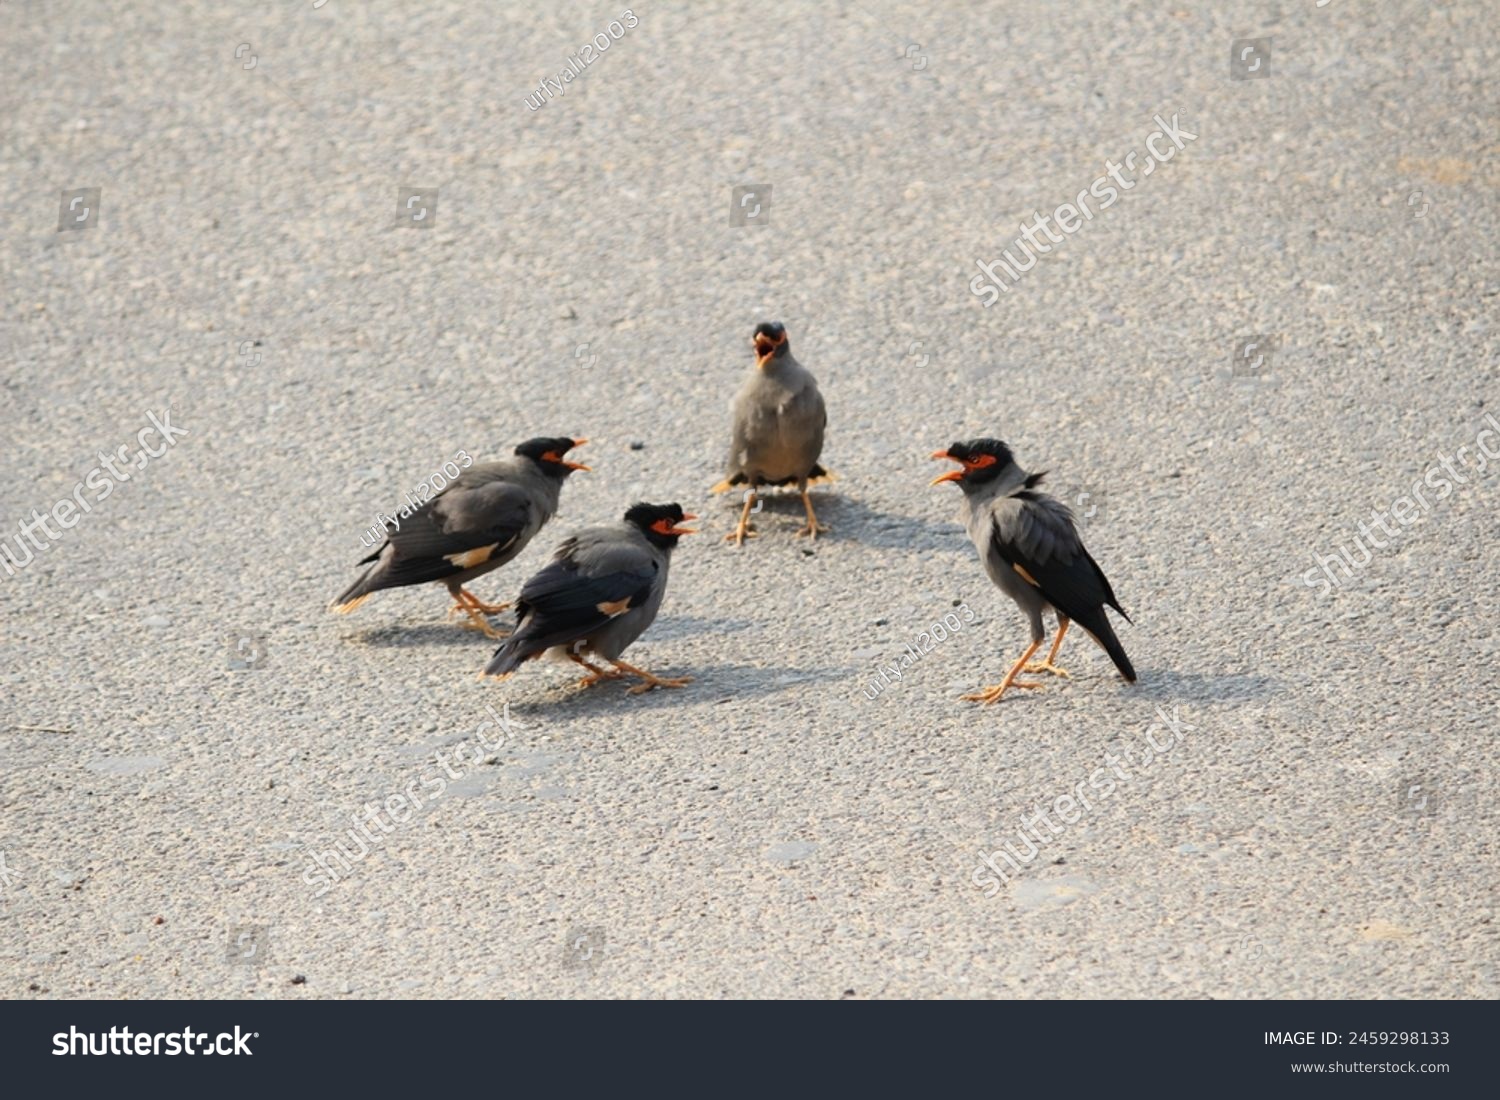 Four birds gather, their postures animated, as if engaged in lively discourse. Nature's silent symposium, a scene of avian camaraderie. #2459298133